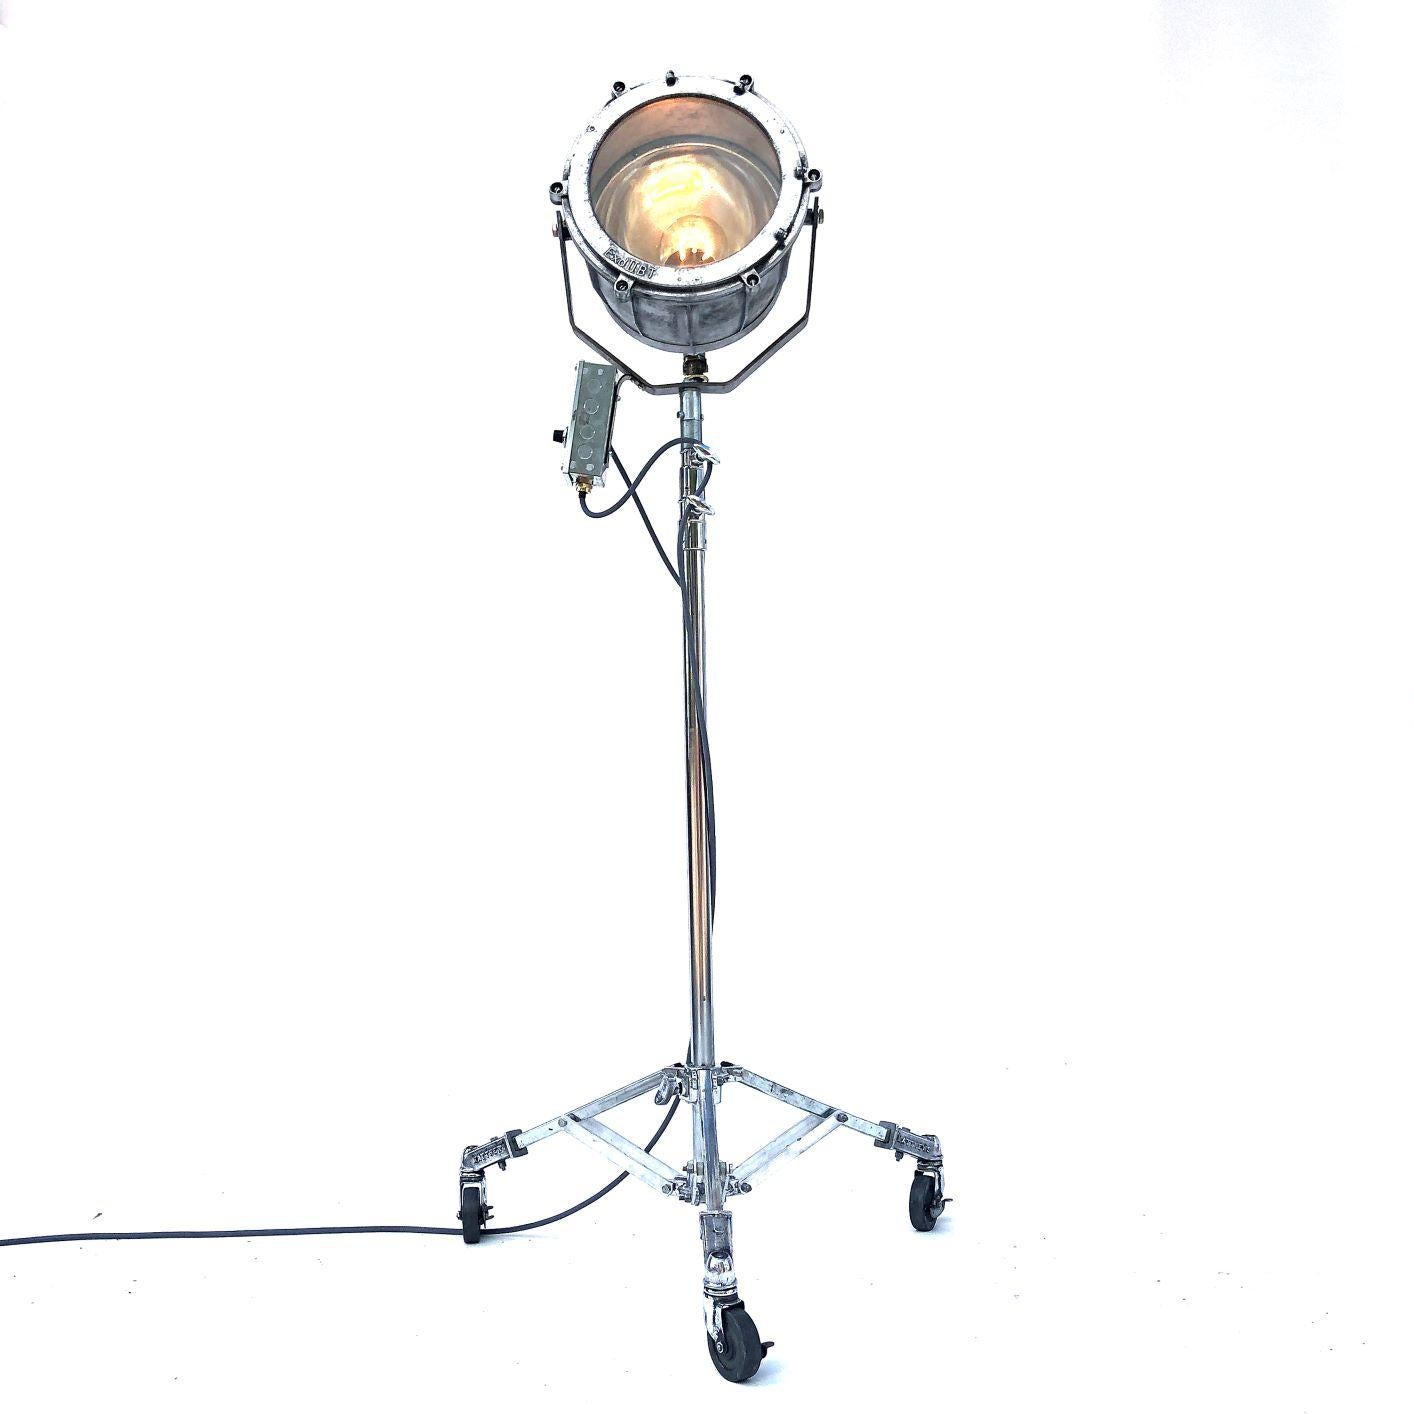 A reclaimed retro Industrial aluminum explosion proof cargo light coupled with a telescopic Matthews theatre Stand to create a bespoke floor standing lamp.

A dimmer switch has been added to the side of the fixture to operate the light. The light